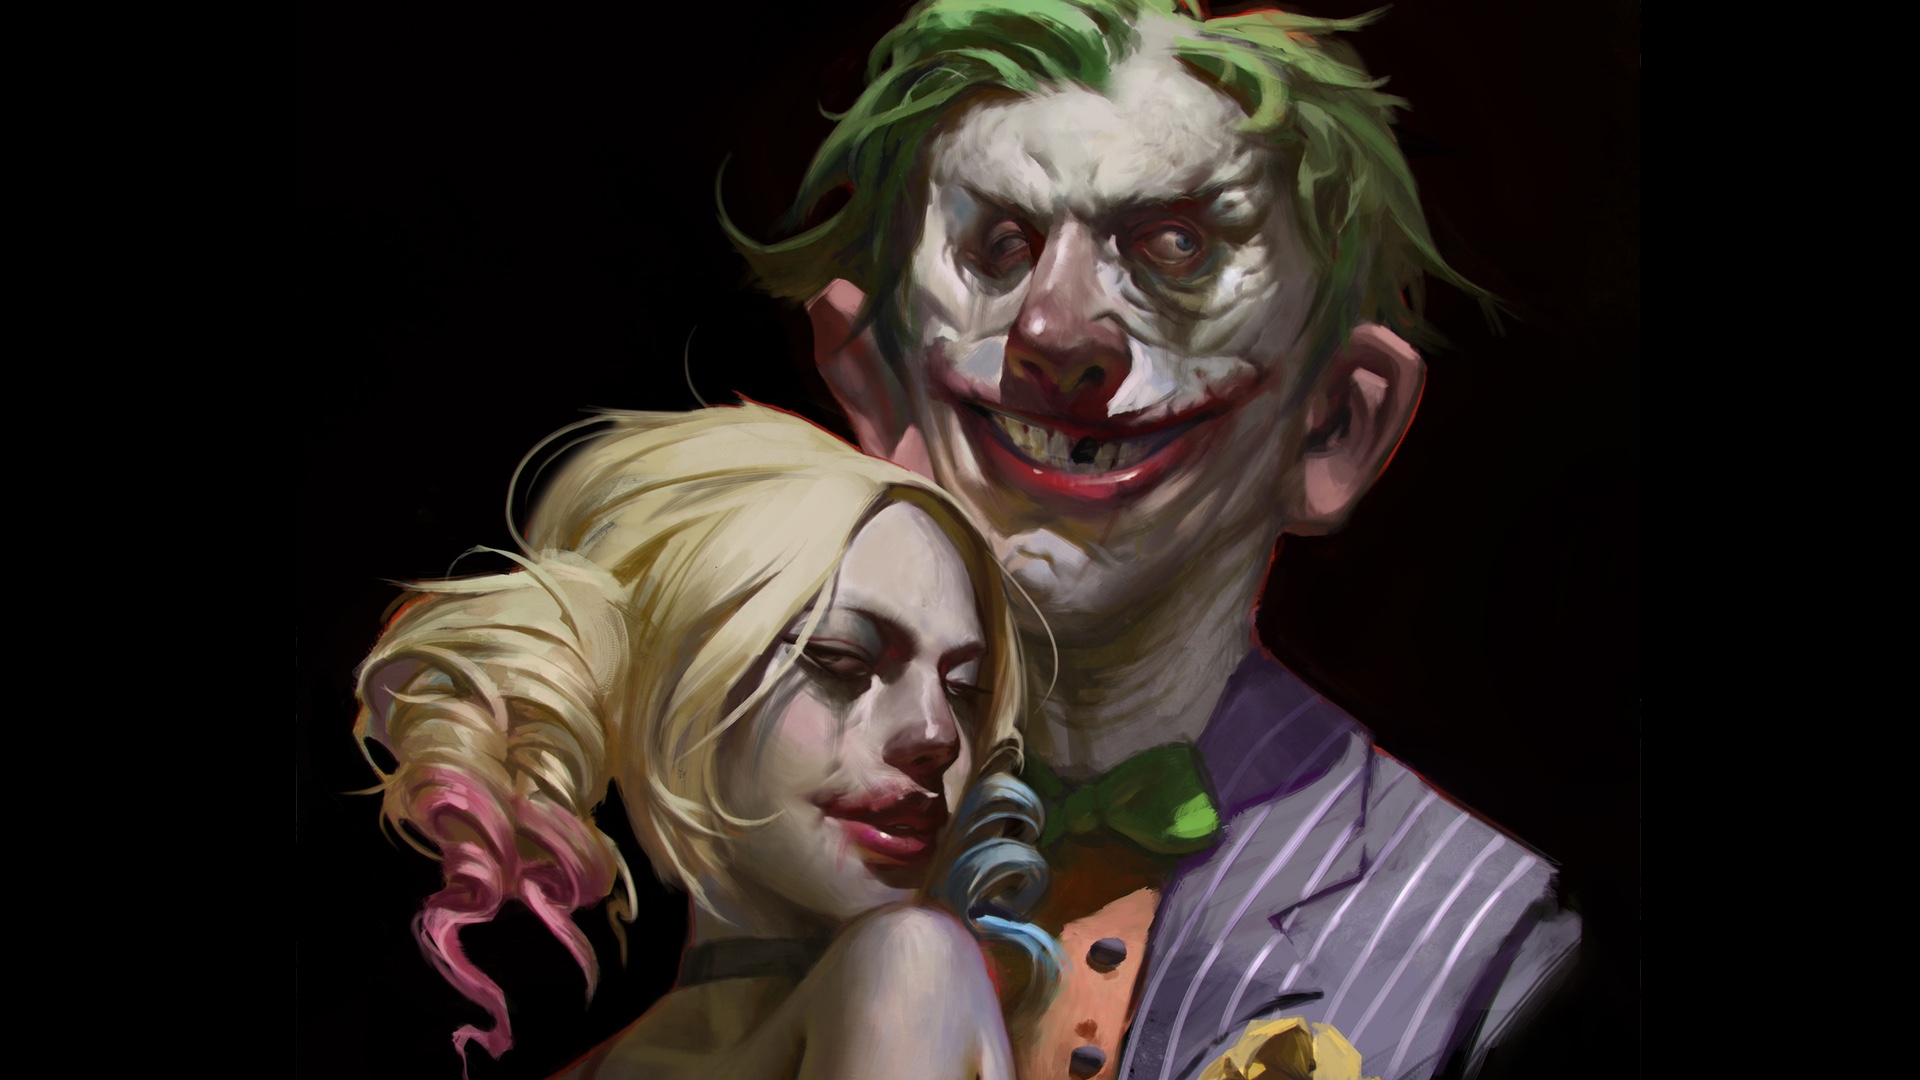 Interesting and Different Take on The Joker and Harley Quinn in Fan Art.